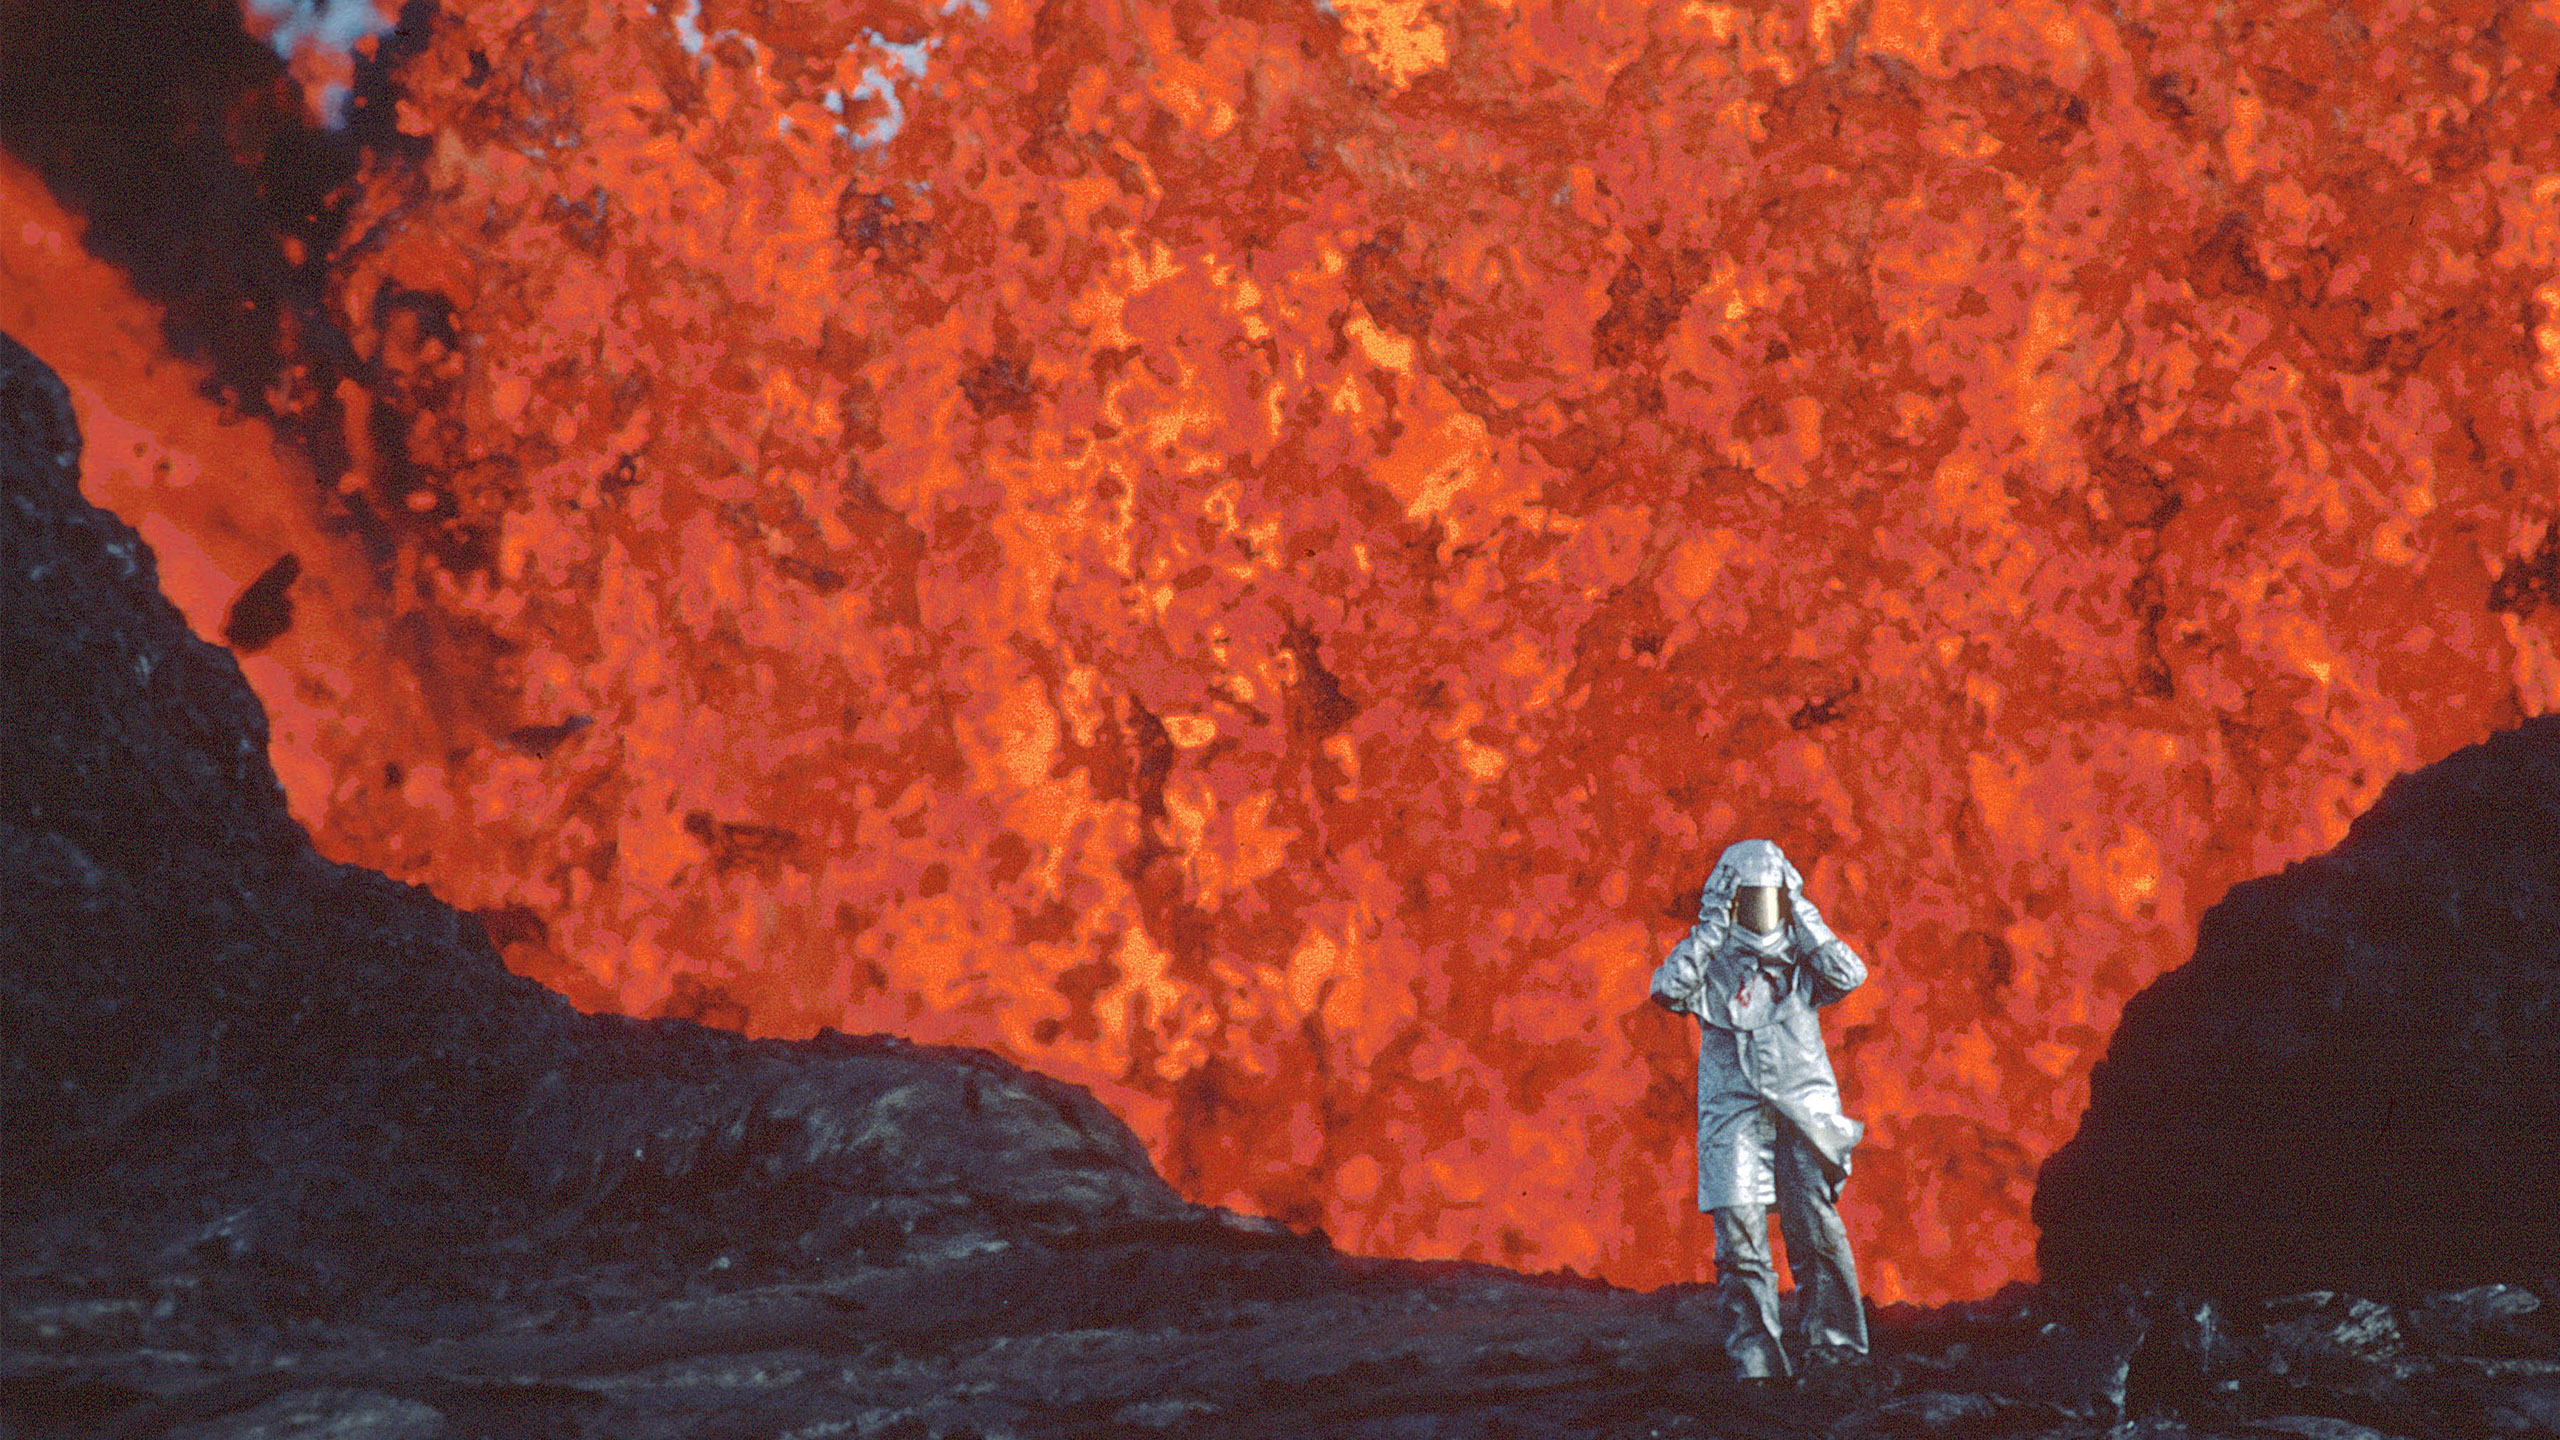 An exploding volcano with a small person in a volcano suit in front.